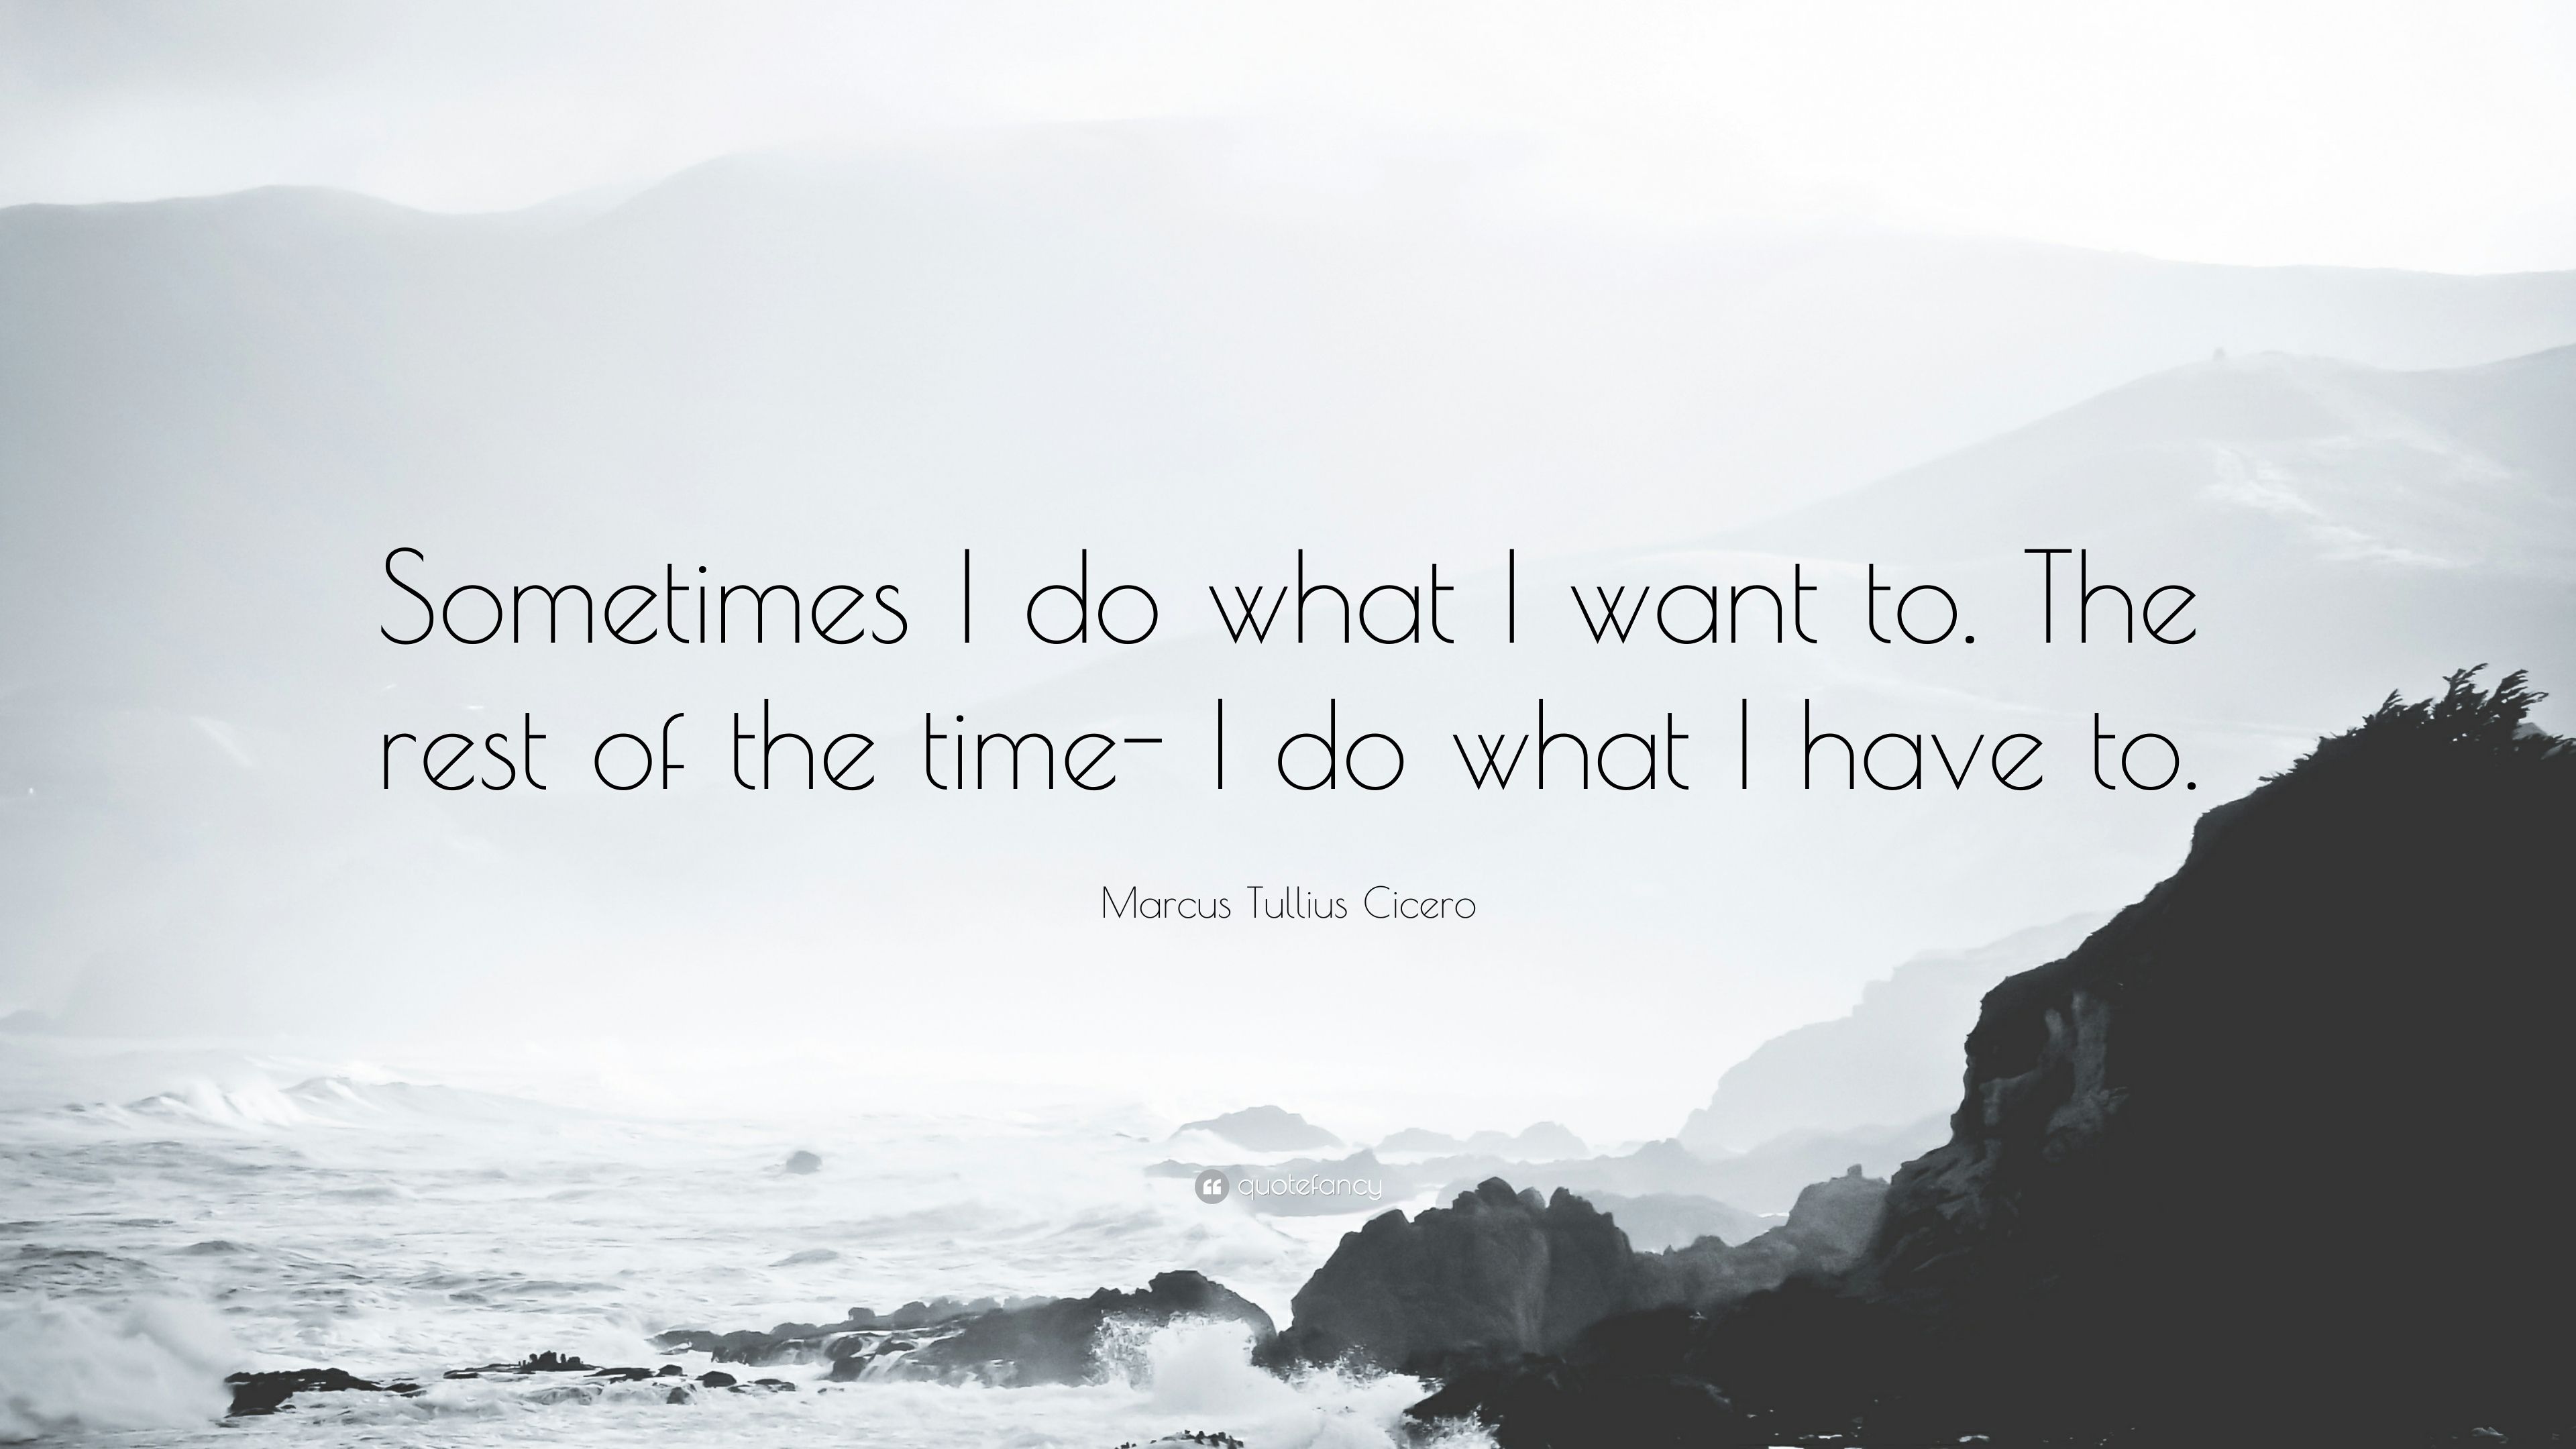 Marcus Tullius Cicero Quote: “Sometimes I do what I want to. The rest of the time- I do what I have to.” (11 wallpaper)